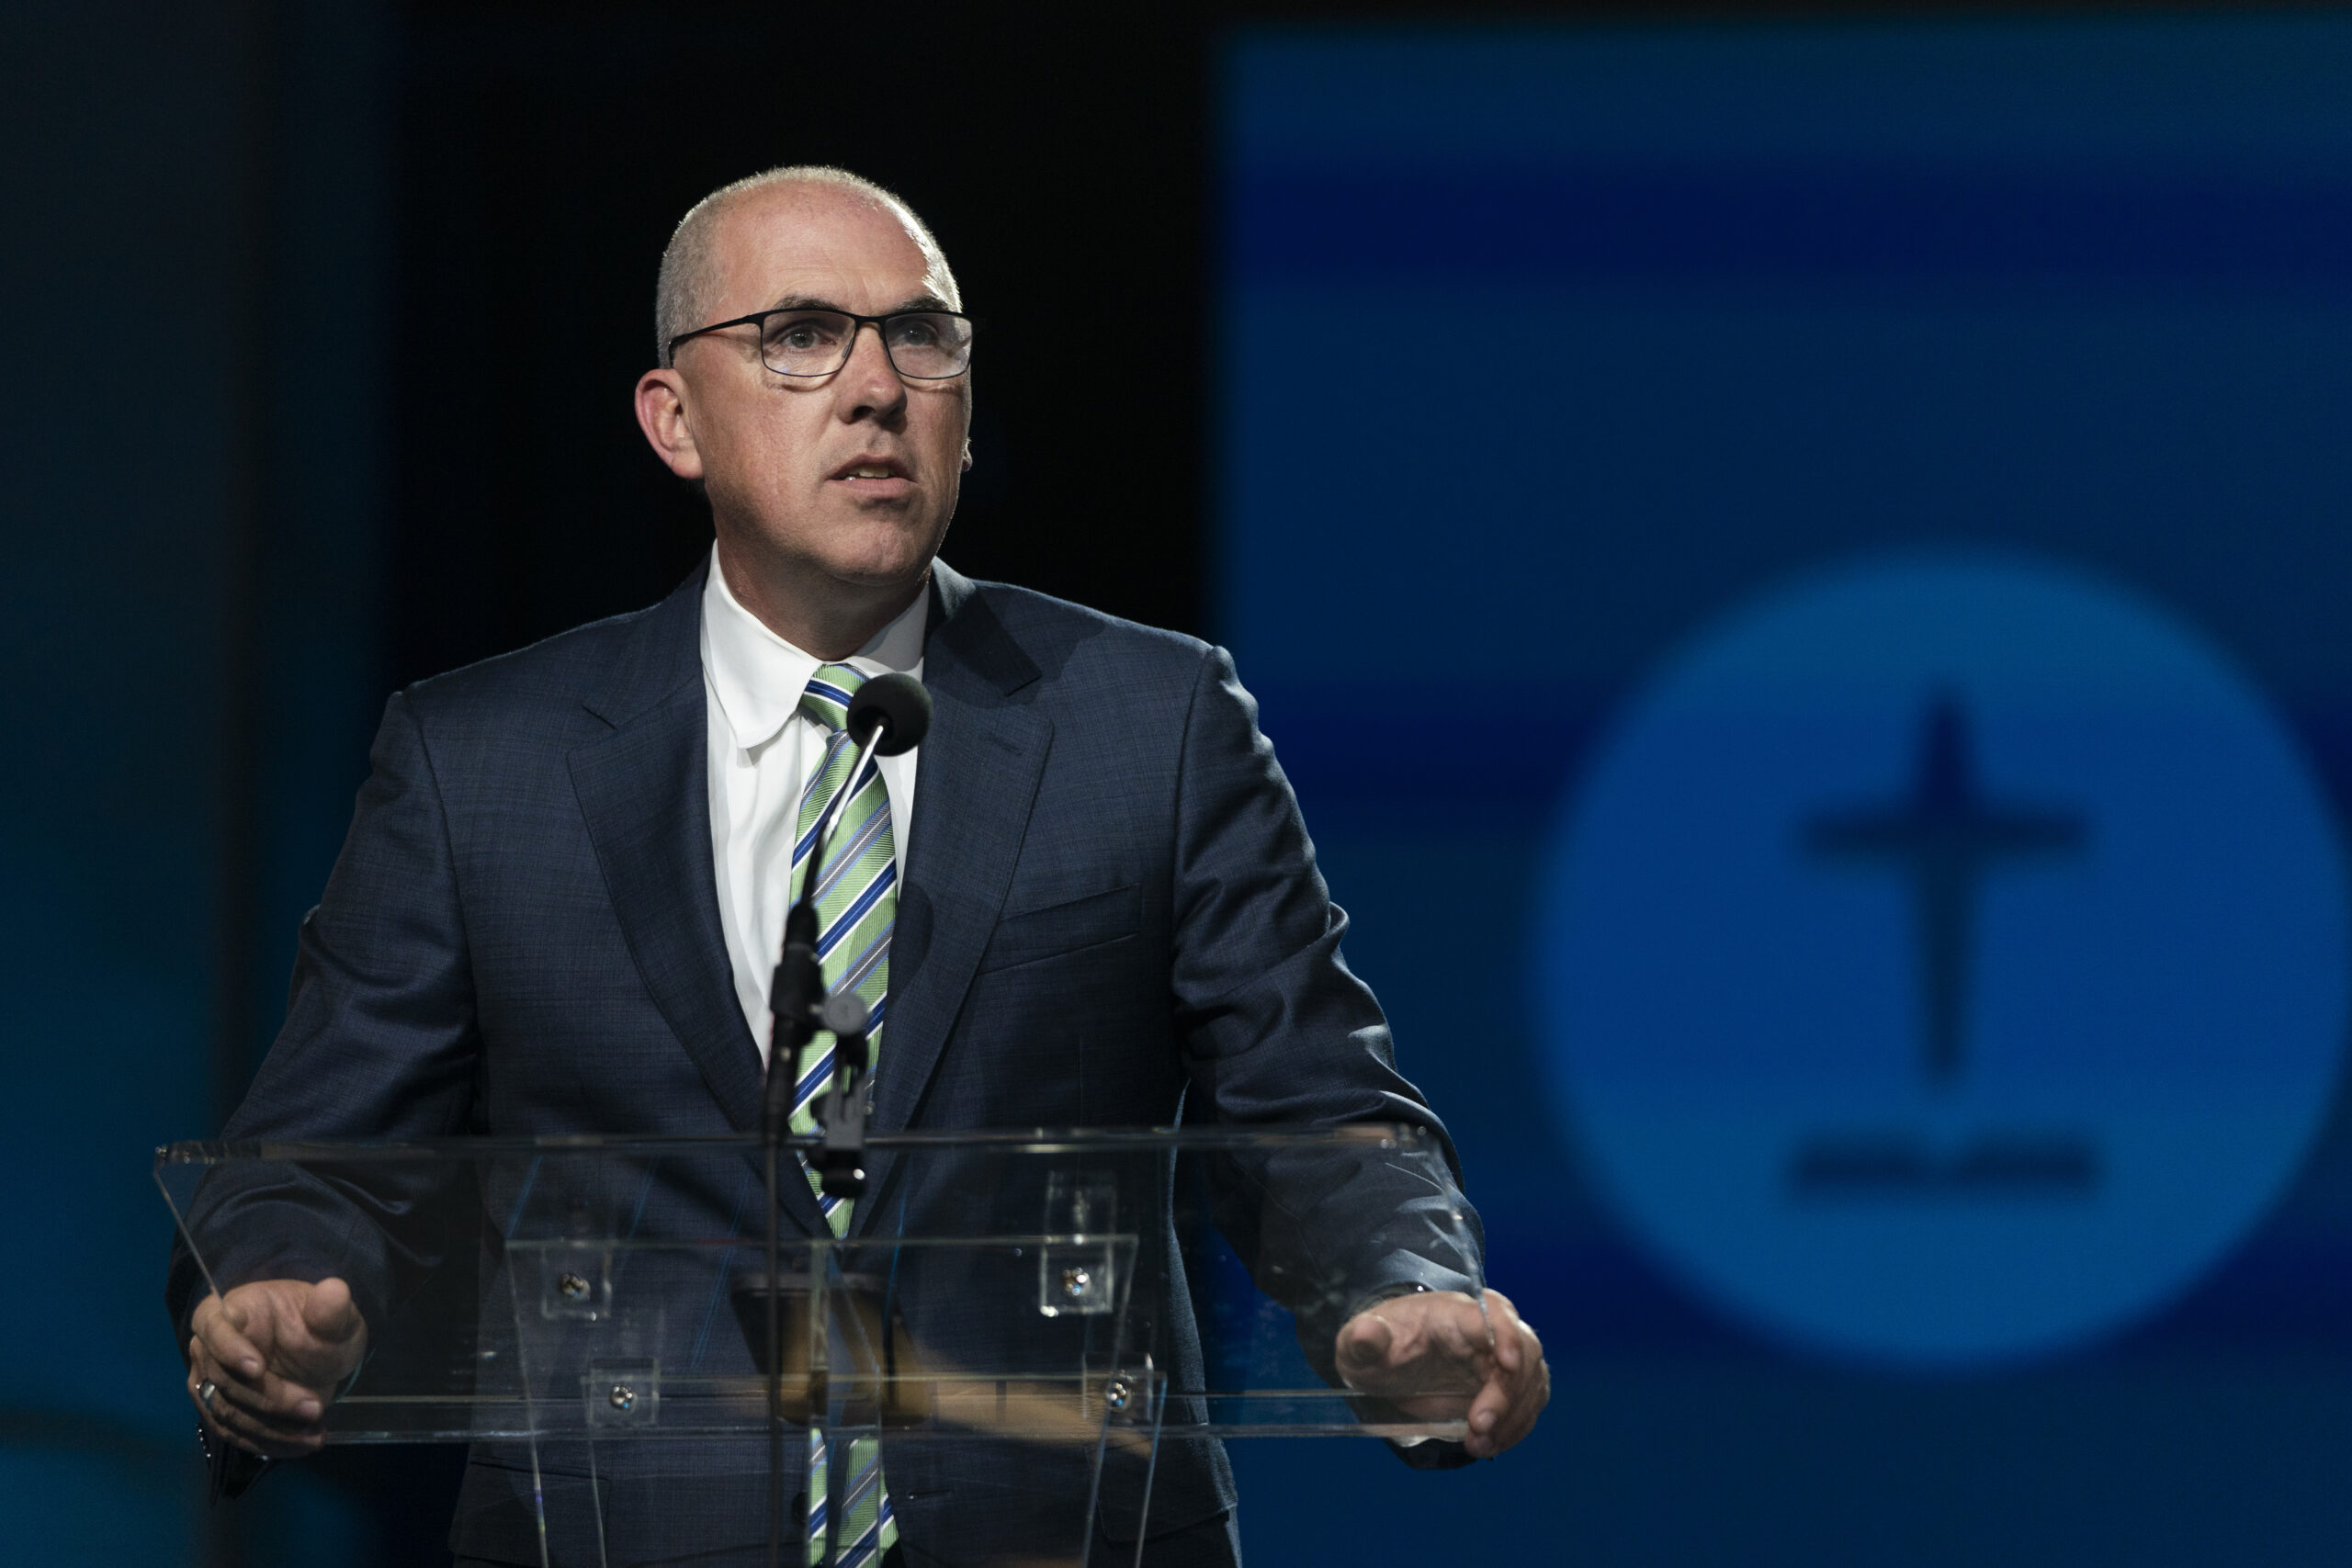 Pastor Bart Barber, a presidential candidate of the Southern Baptist Convention, speaks during its annual meeting in Anaheim, Calif., Tuesday, June 14, 2022. (AP Photo/Jae C. Hong)